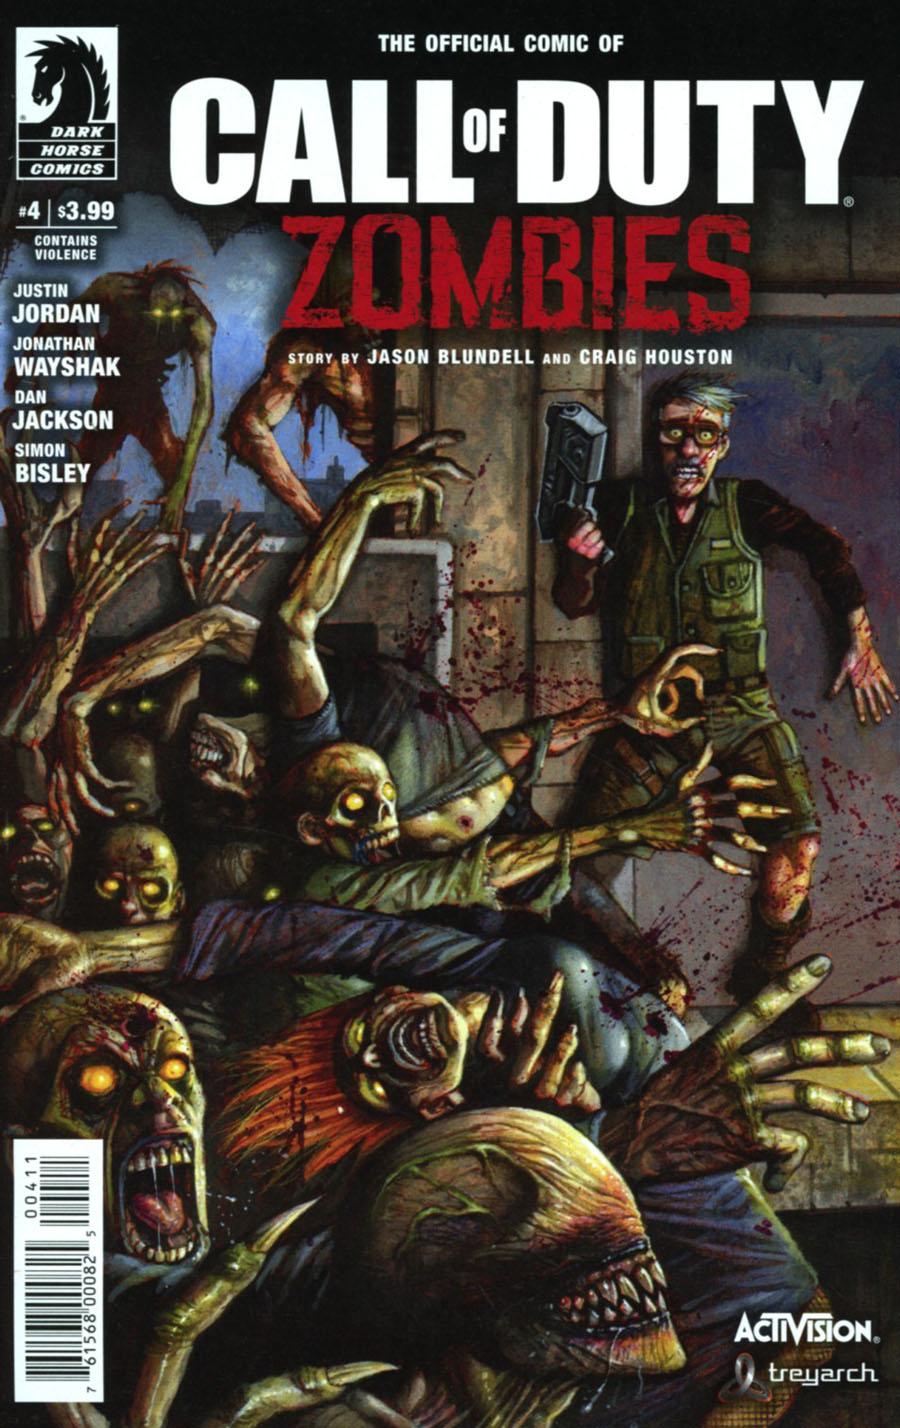 Call Of Duty Zombies Vol. 1 #4